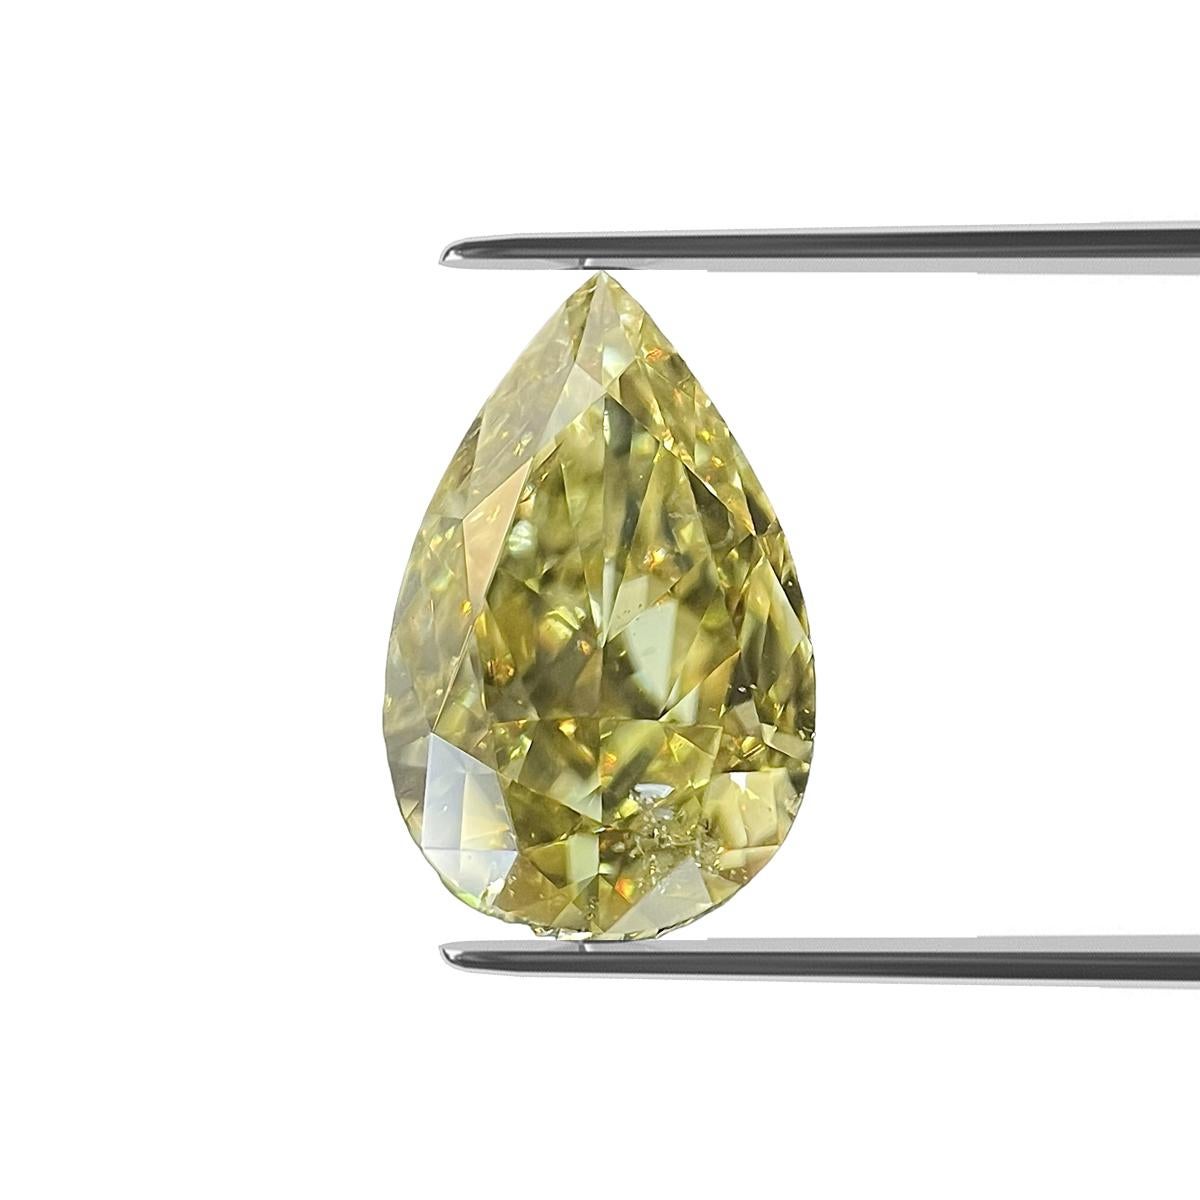 ITEM DESCRIPTION

ID #: NYC56419
Stone Shape: PEAR MODIFIED BRILLIANT
Diamond Weight: 1.00ct
Color: Fancy  Yellow
Cut: Excellent
Measurements: 8.28 x 5.26 x 3.30 mm
Symmetry: Excellent
Polish: Excellent
Fluorescence: None
Certifying Lab: GIA
GIA